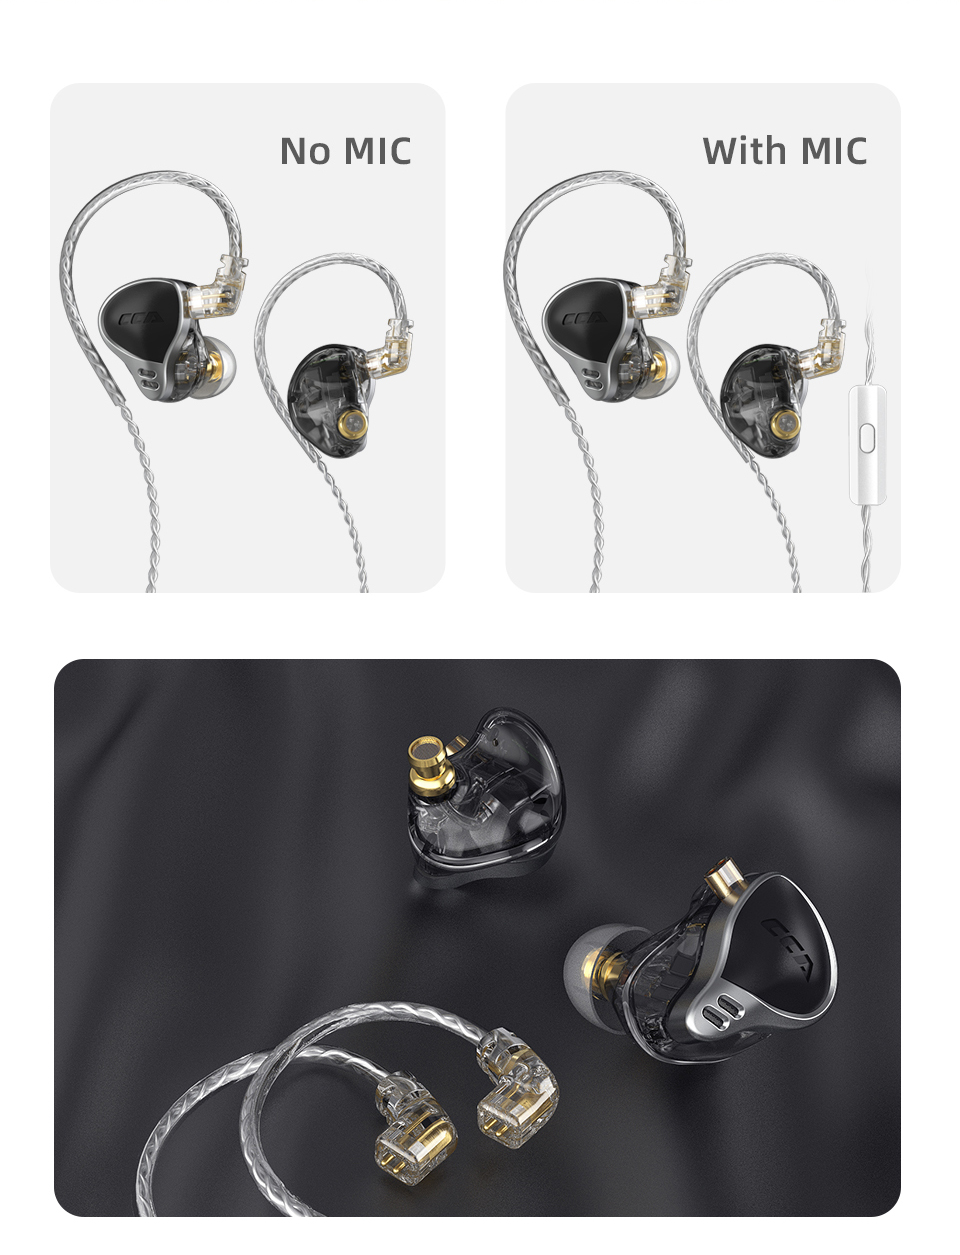 24BA-UnitsCCA-CA24-Balanced-Armature-HiFi-Noise-Cancelling-In-ear-Headset-Detachable-35mm-Wired-Gami-1902071-14